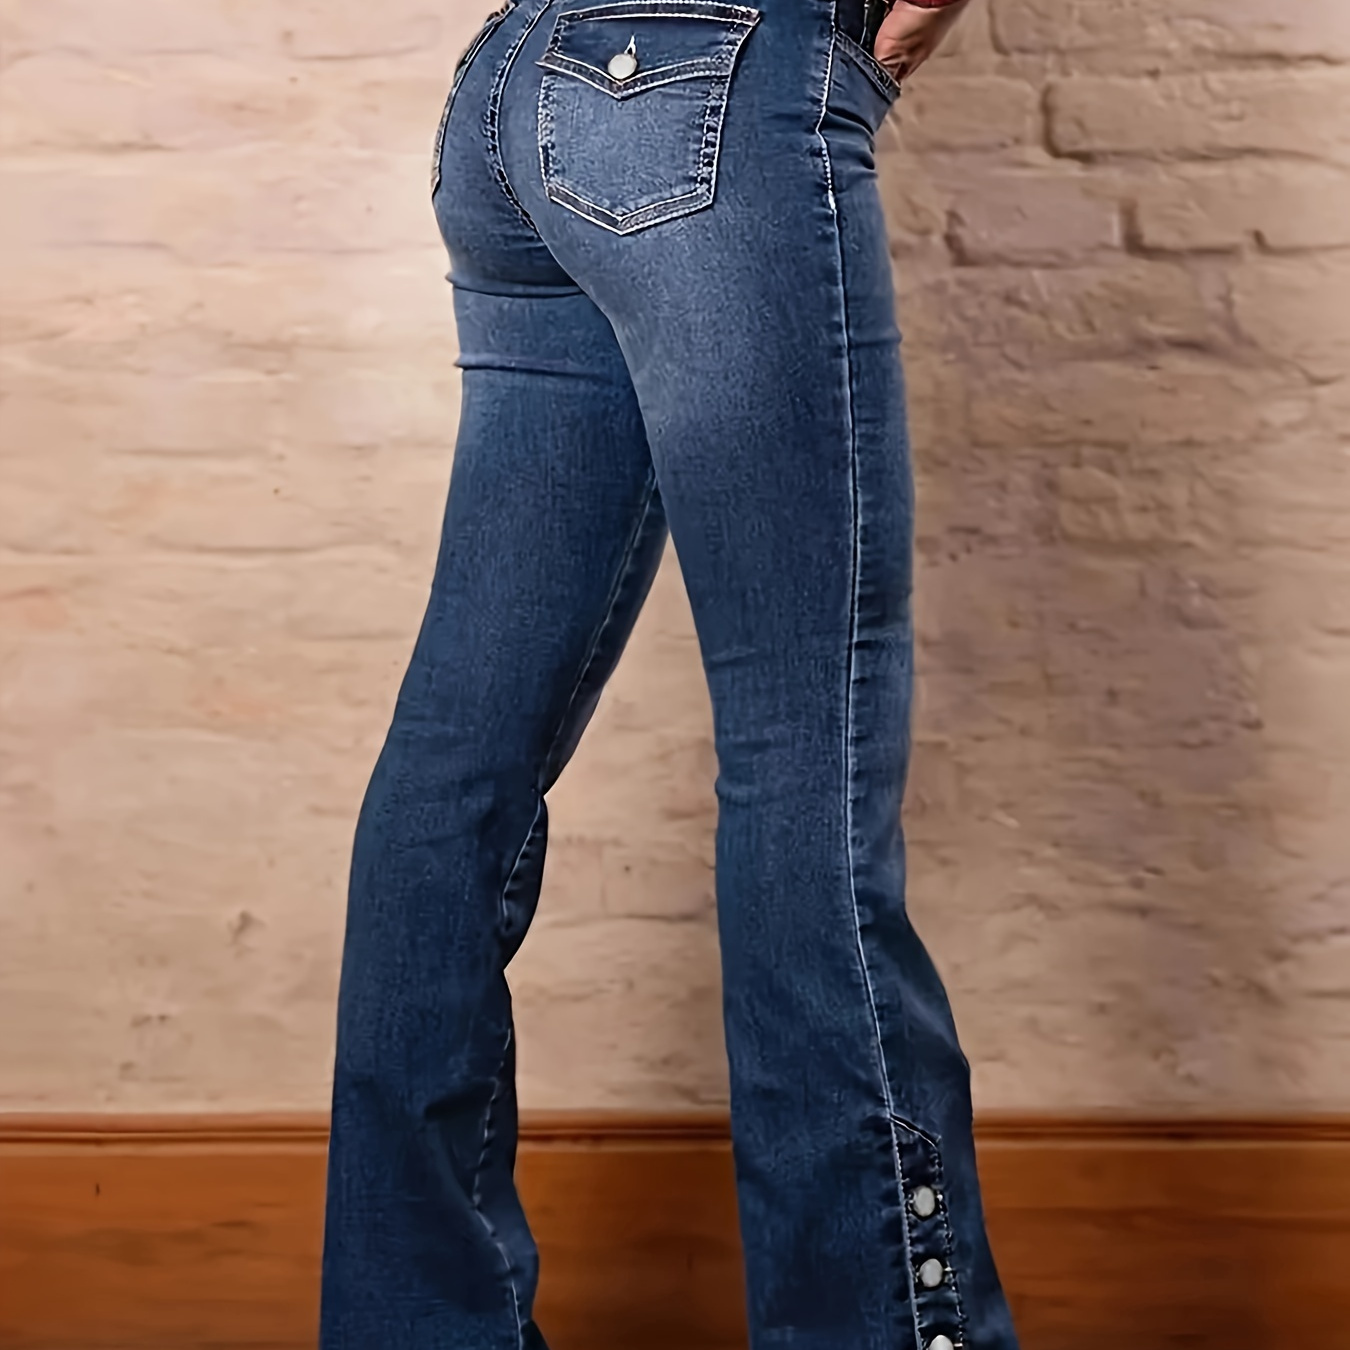 

Women's Fashion Flared Jeans With Stretch, Casual Style, Side Button Detailing, Versatile Denim Bell-bottoms Suit For Autumn